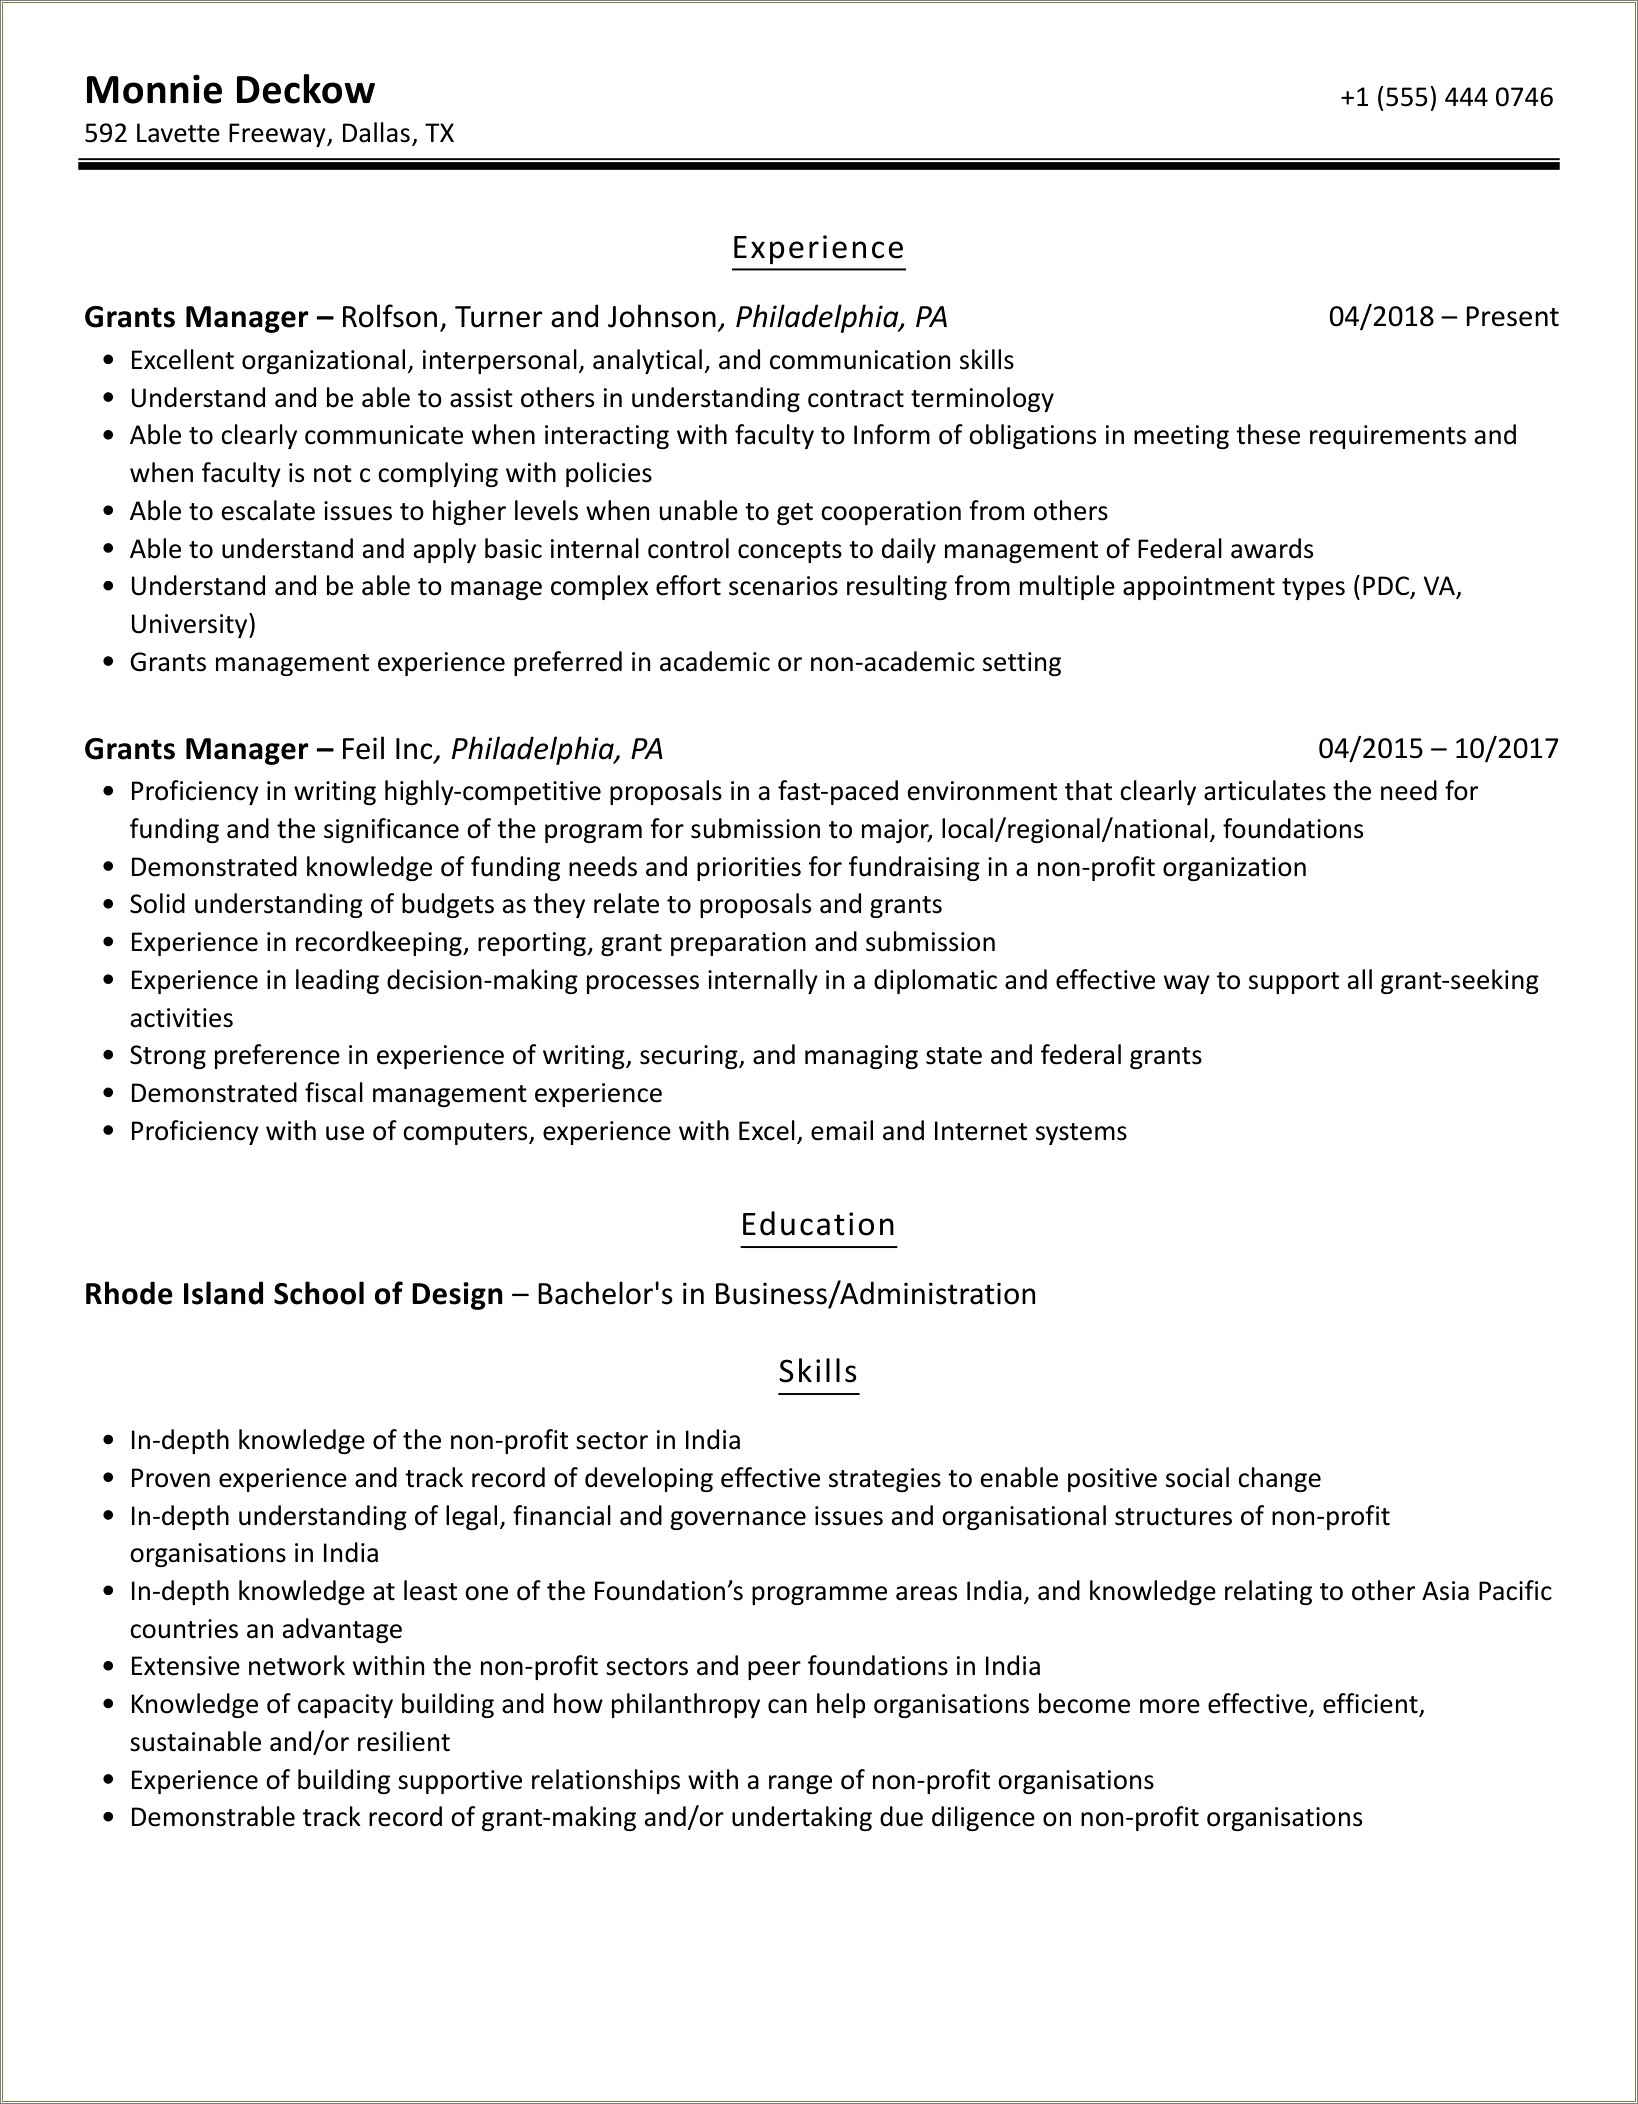 Livestock Manager Resume Used For A Grant